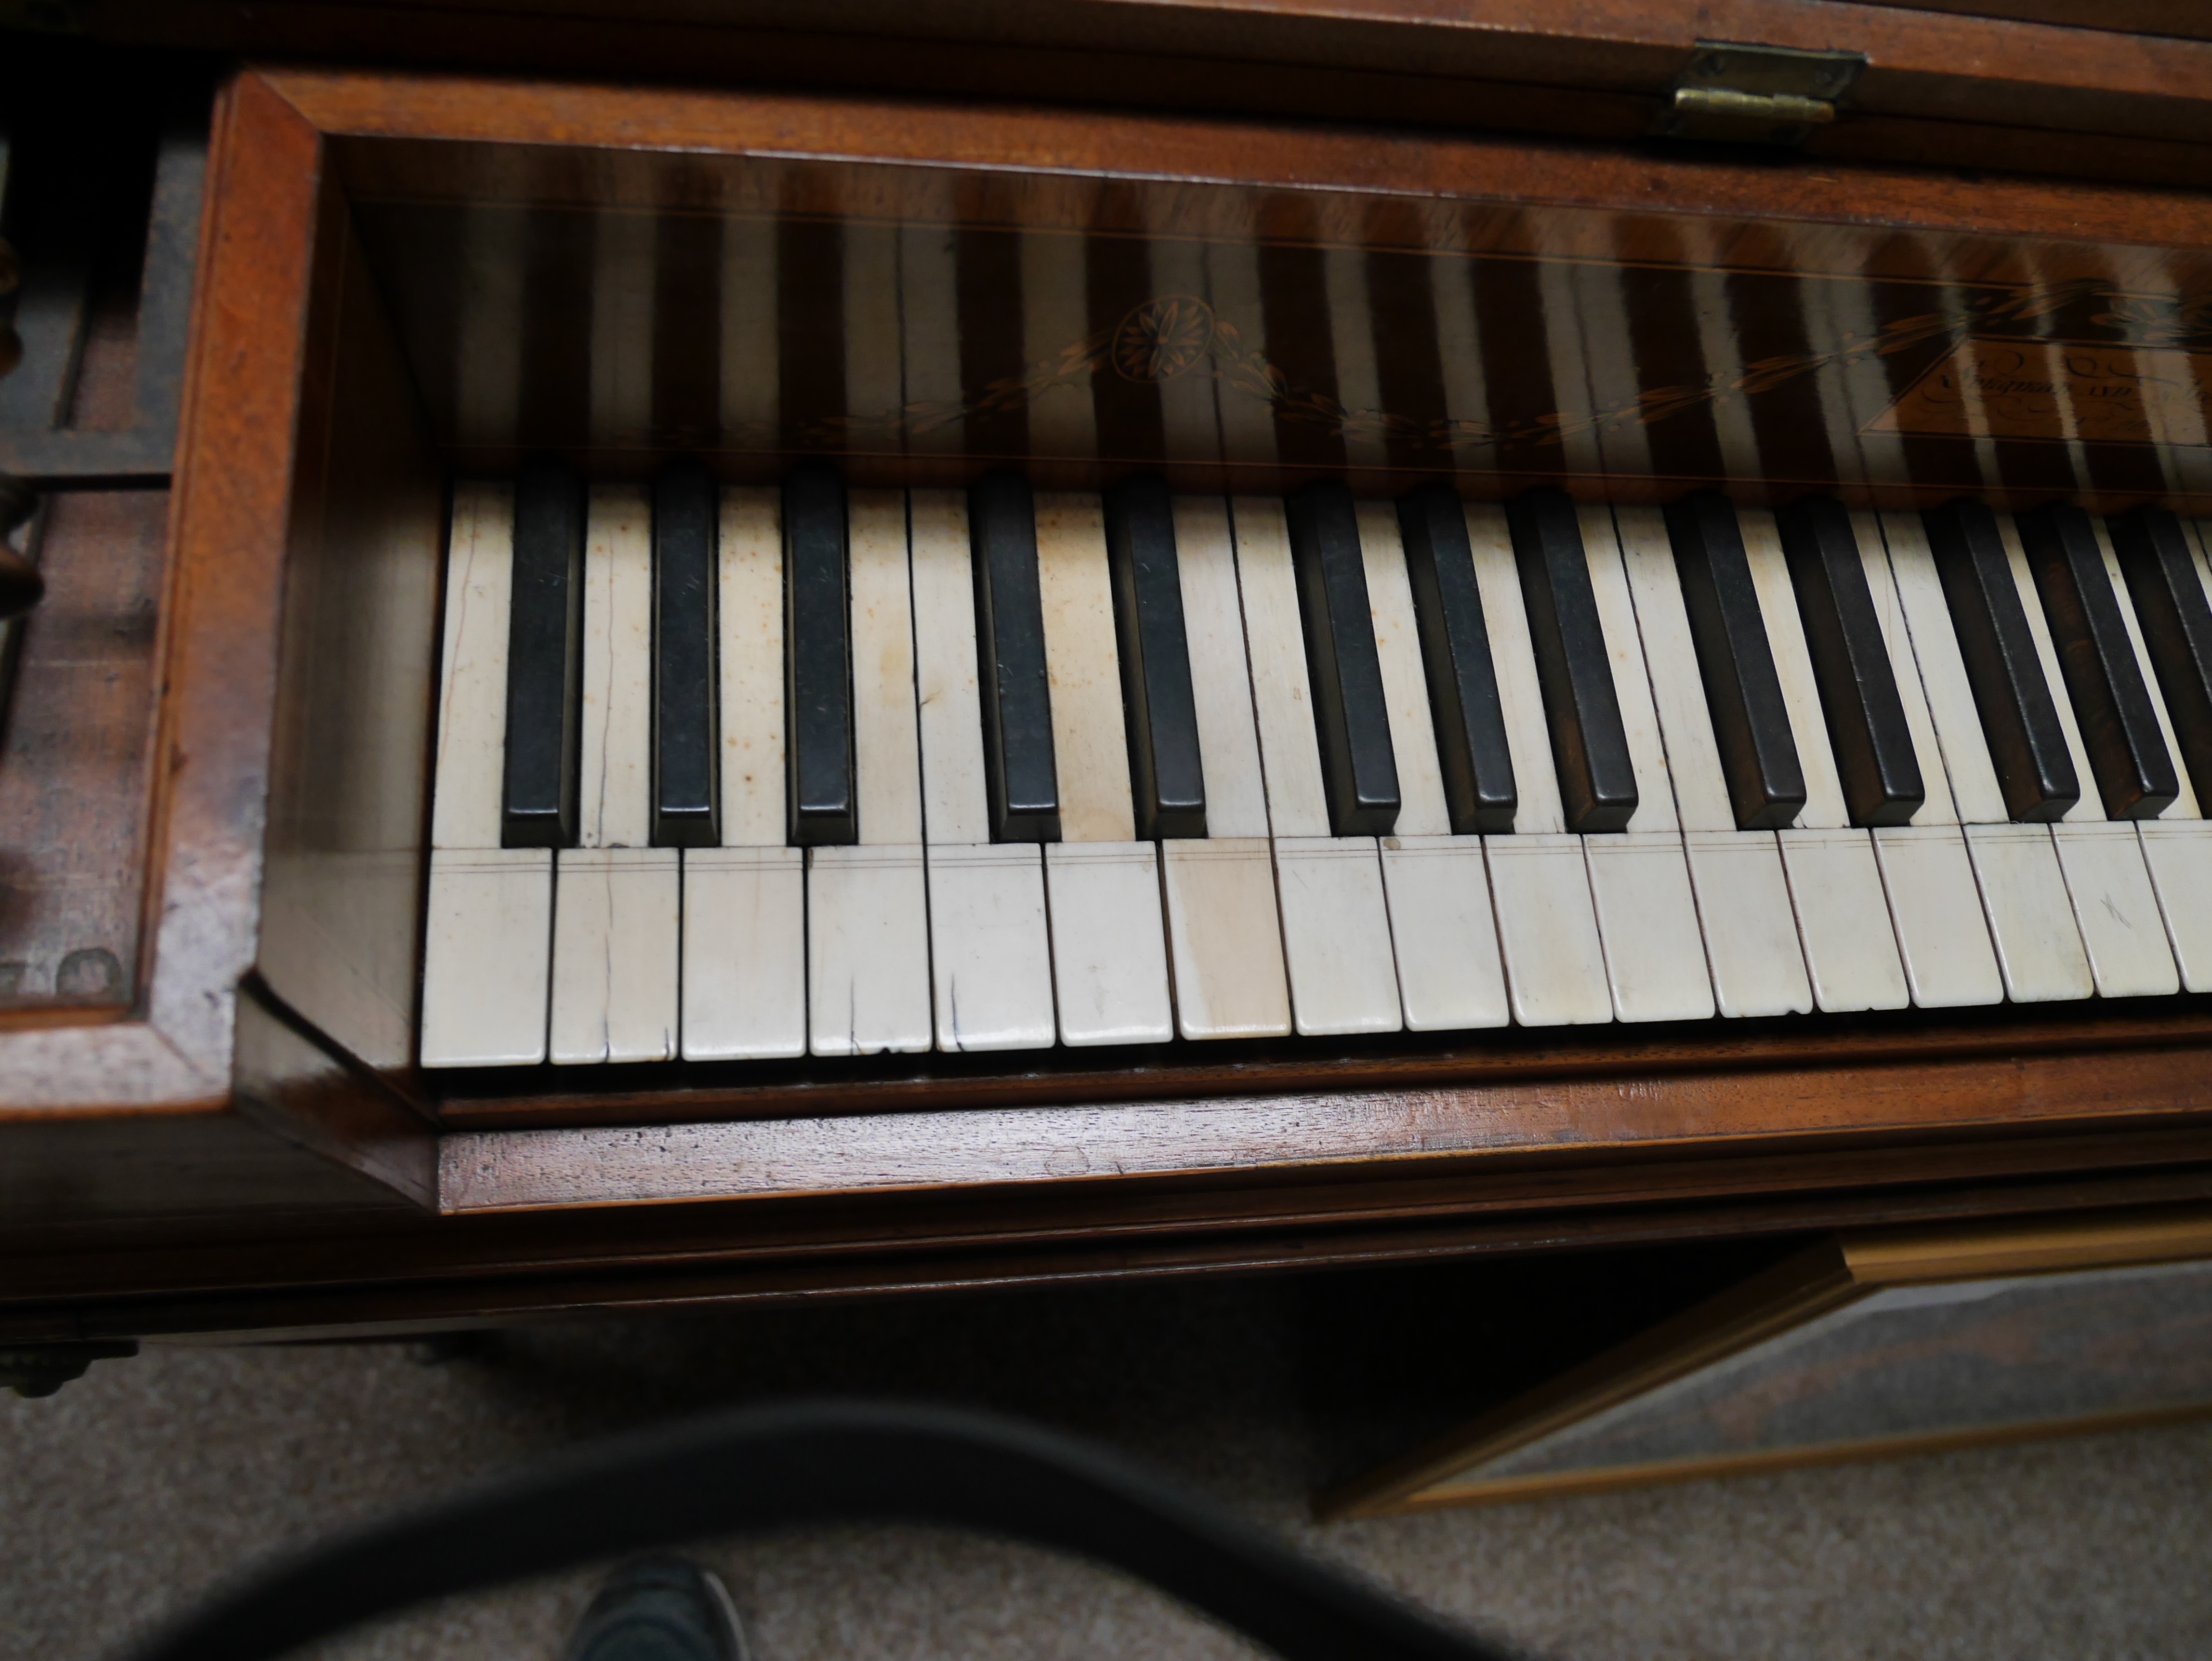 Longman & Broderip - Square Piano London good order all keys play but benefit from tunning - Image 6 of 10